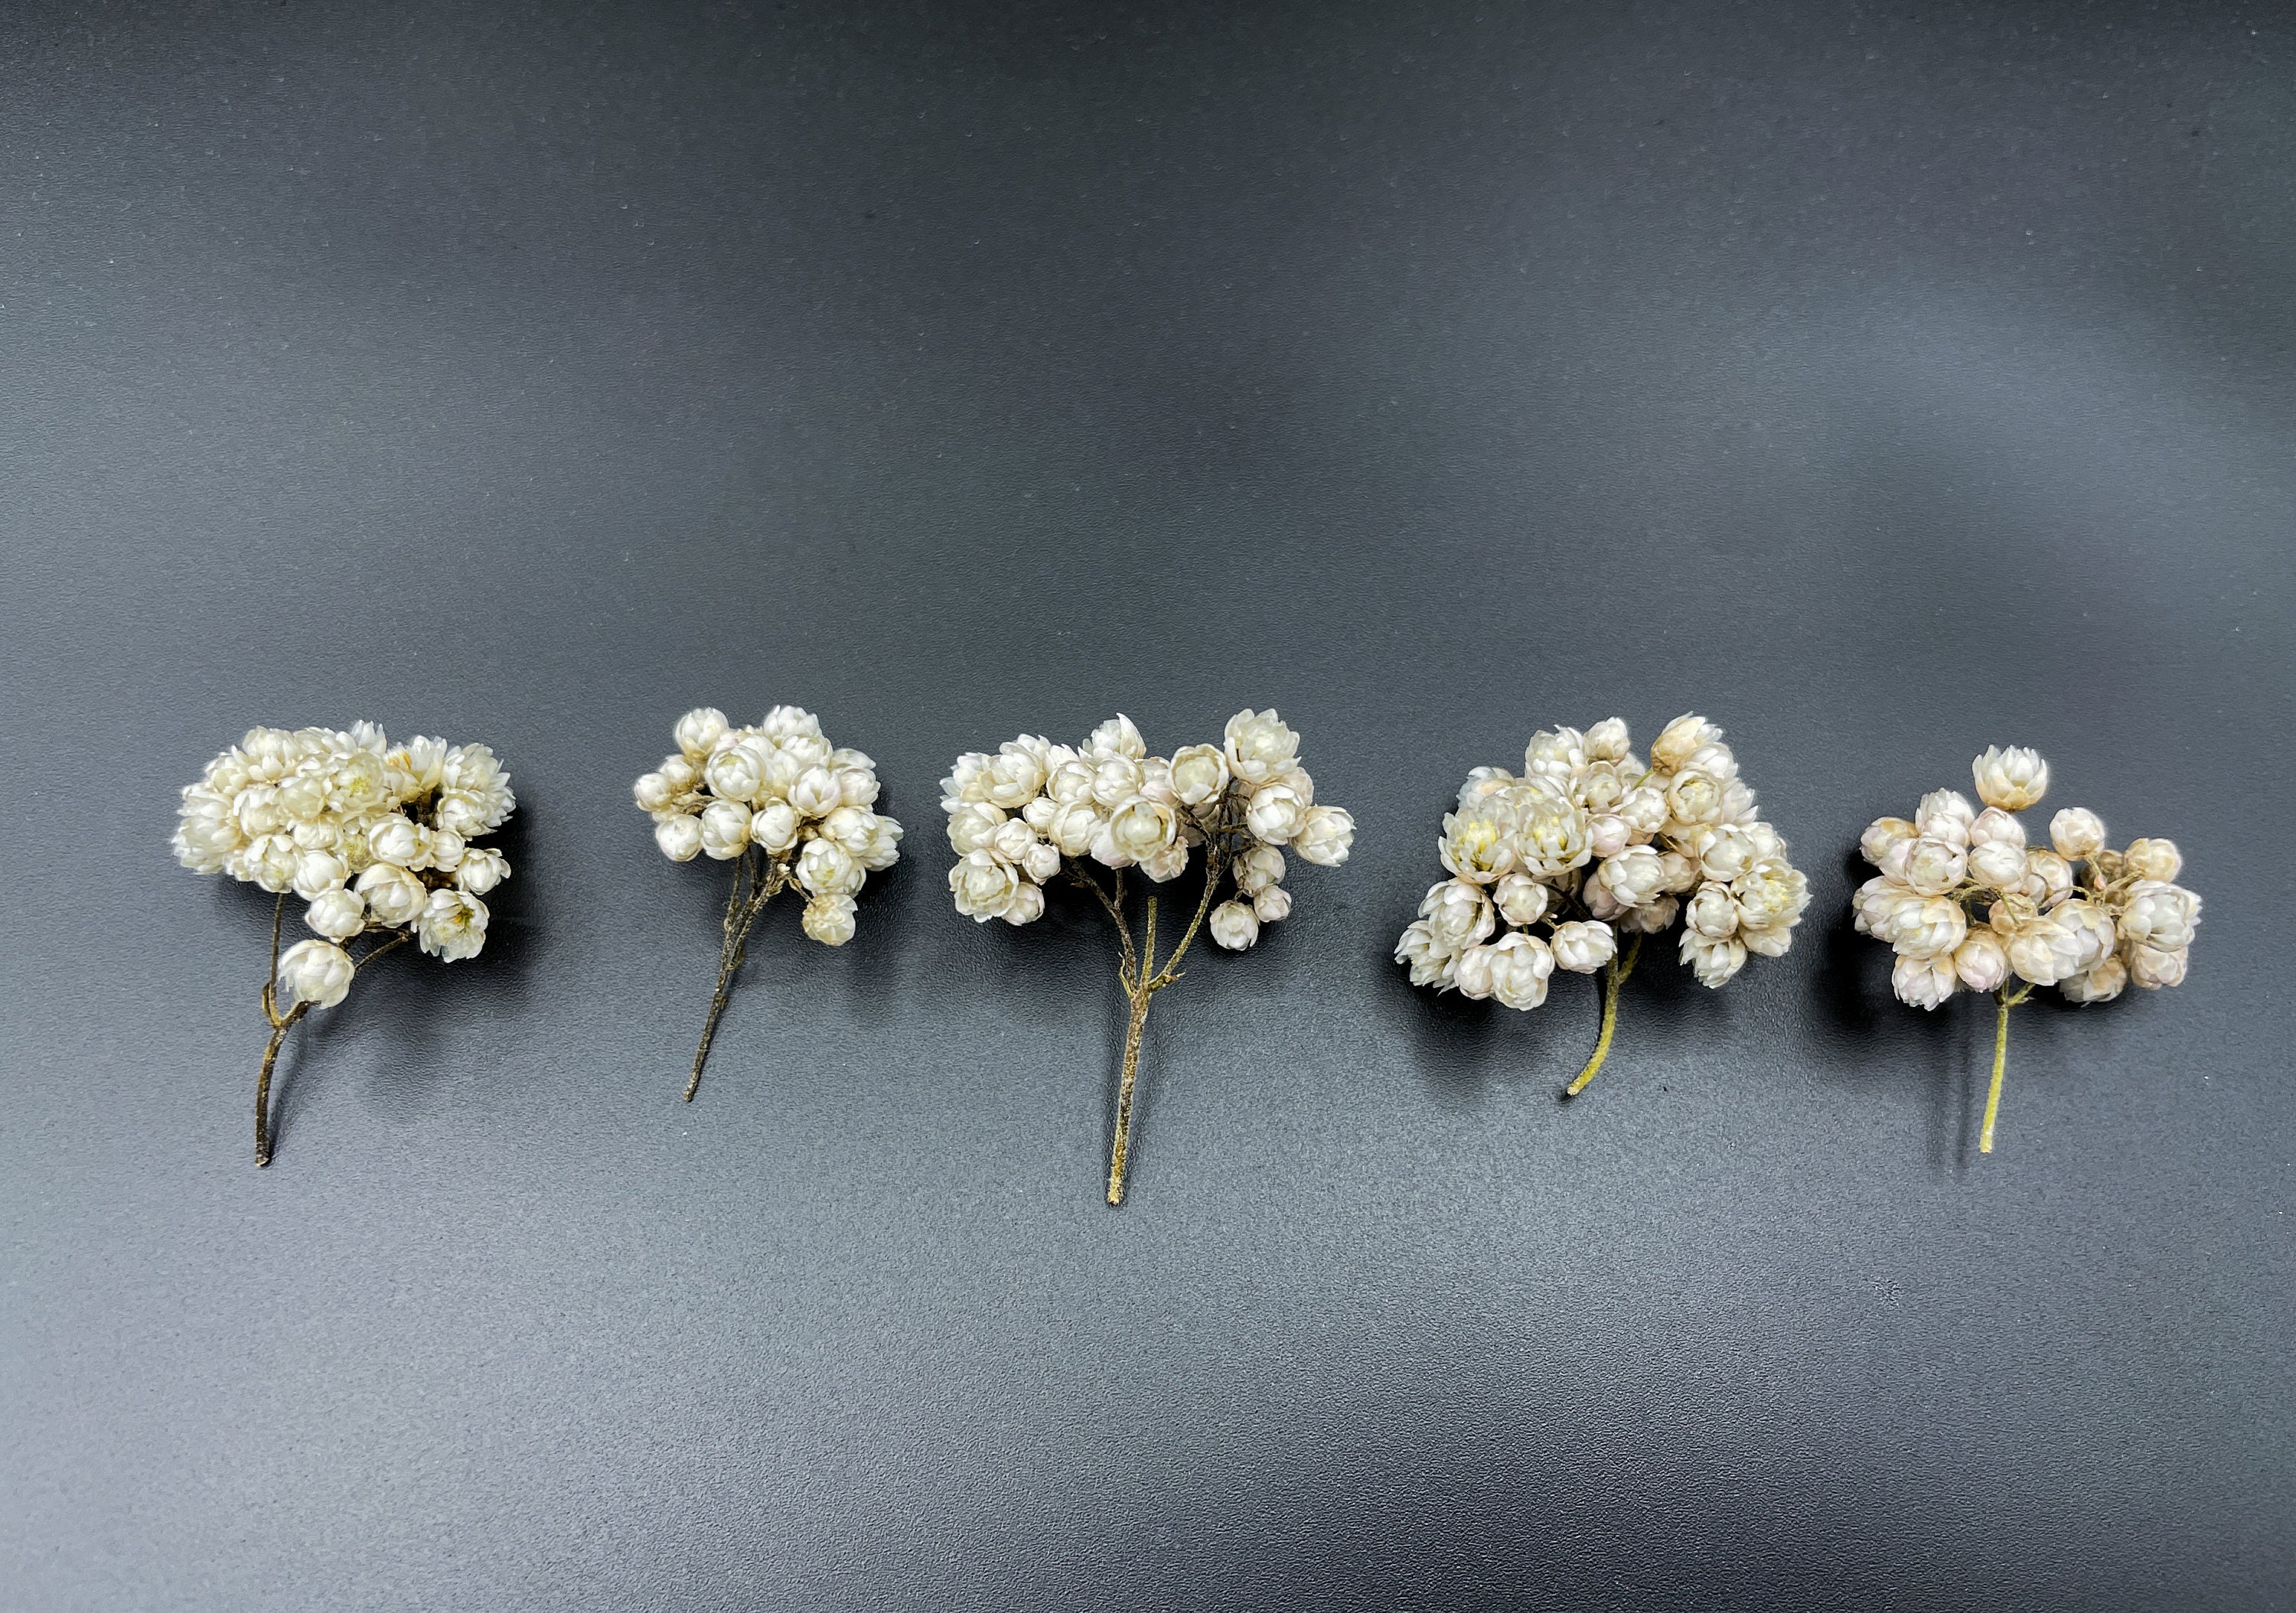 Dried Tiny Flowers 45pcs for Resin, Mini Dried Flowers for Rcrafts